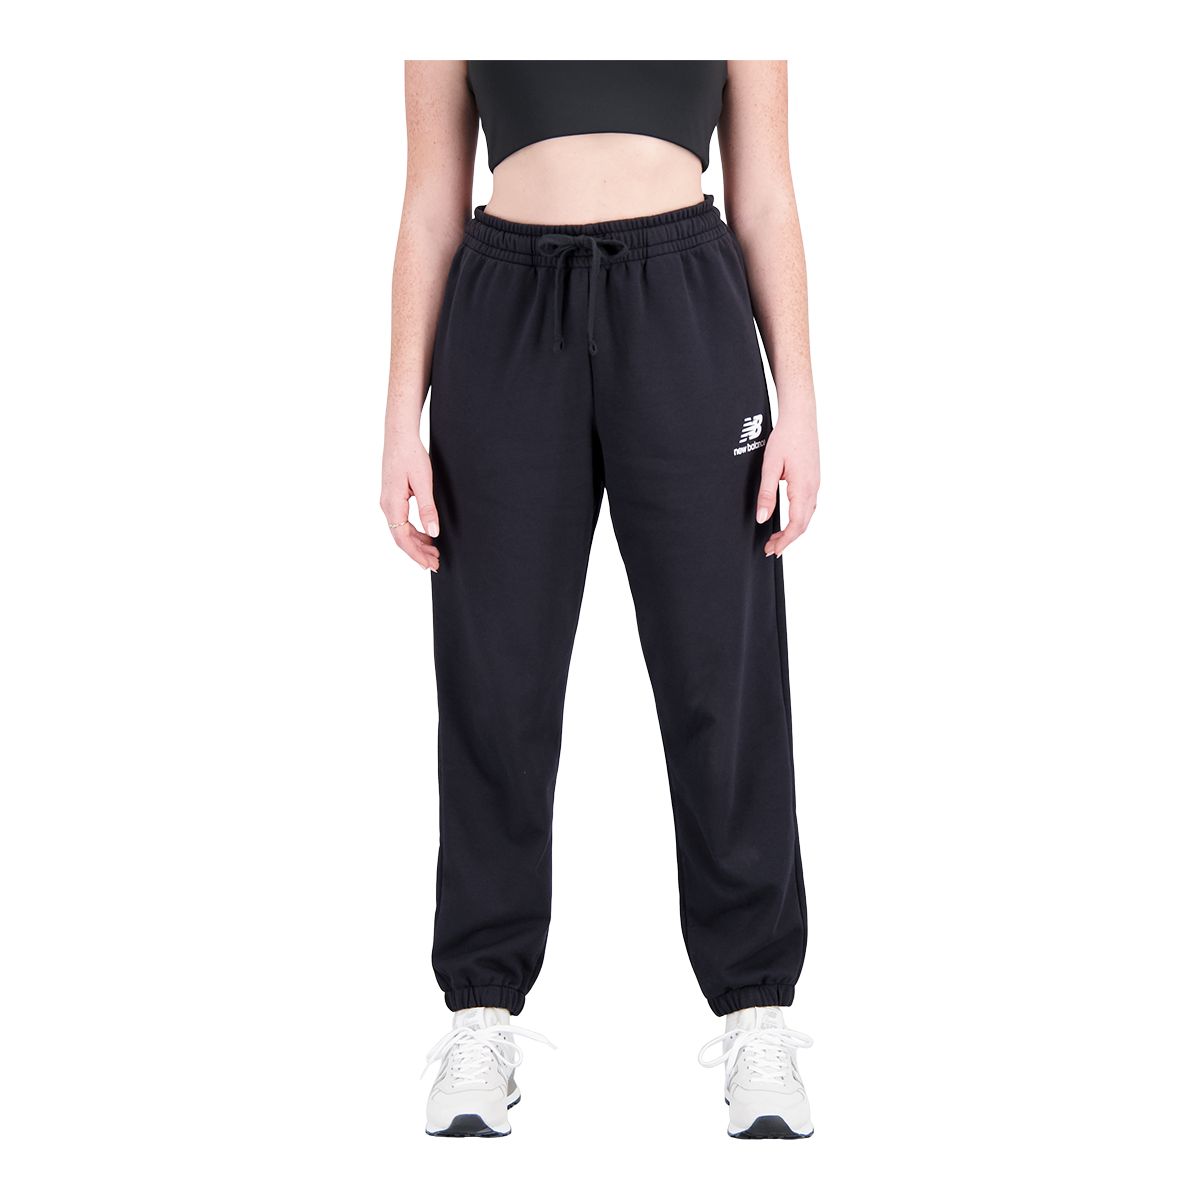 https://media-www.sportchek.ca/product/div-03-softgoods/dpt-70-athletic-clothing/sdpt-02-womens/334004733/nb-w-essentials-sweat-pant-60575933-1d06-45ce-94c4-fc7679441a18-jpgrendition.jpg